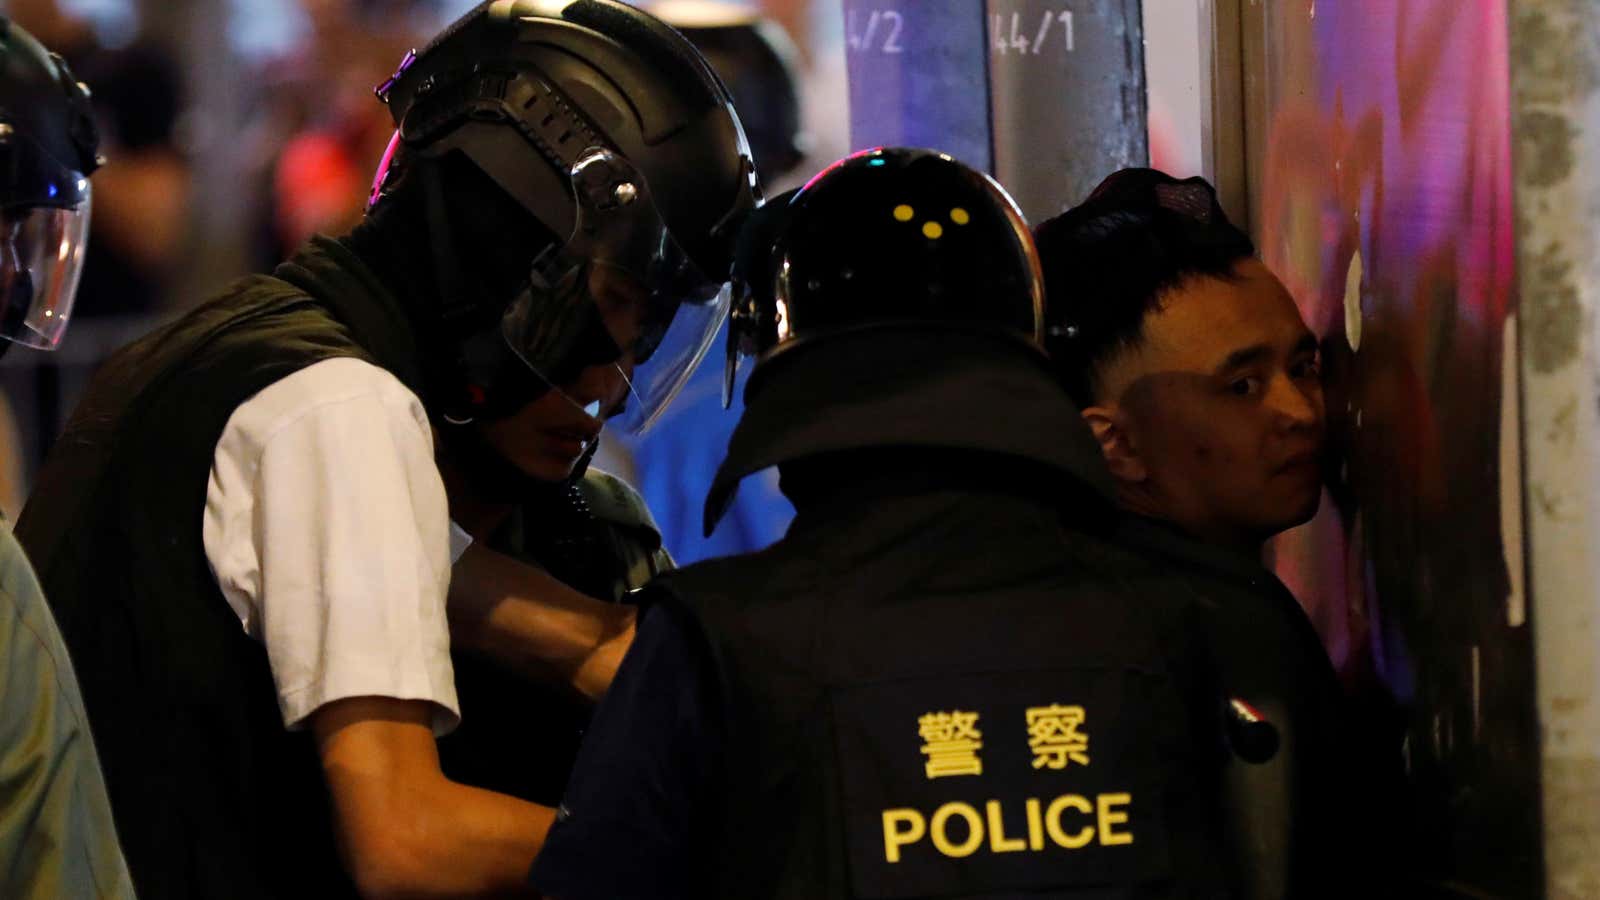 Hong Kong police detain a protestor—a moment captured by the press.